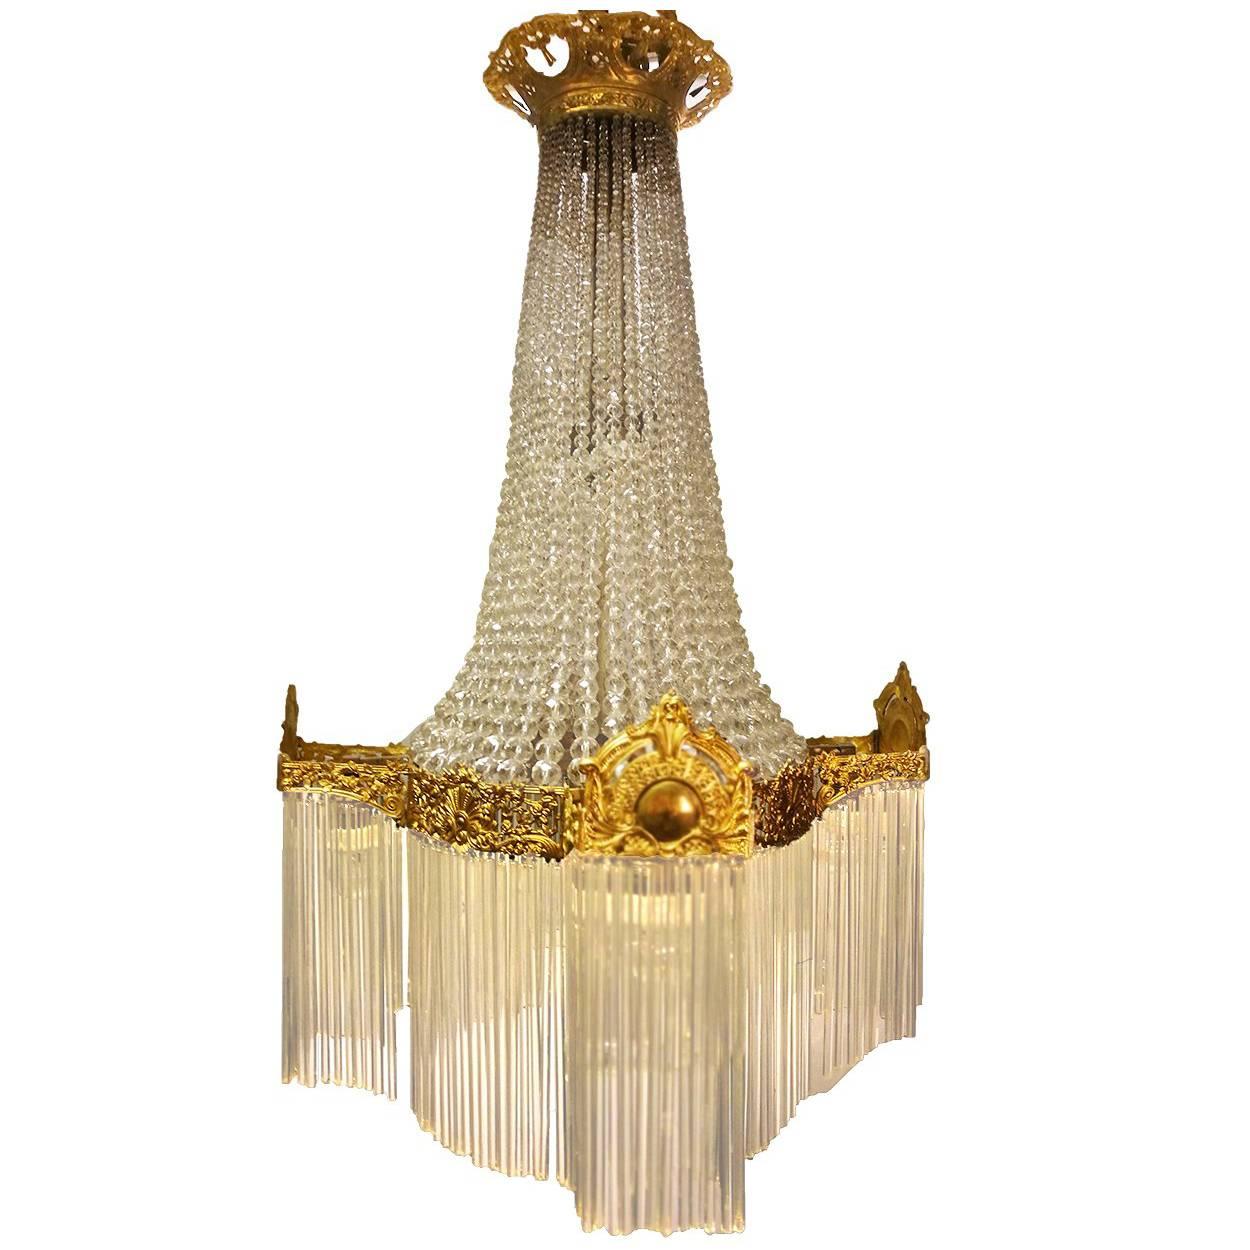 Large French 19th-20th Century Empire Gilt Bronze and Cut-Glass Chandelier For Sale